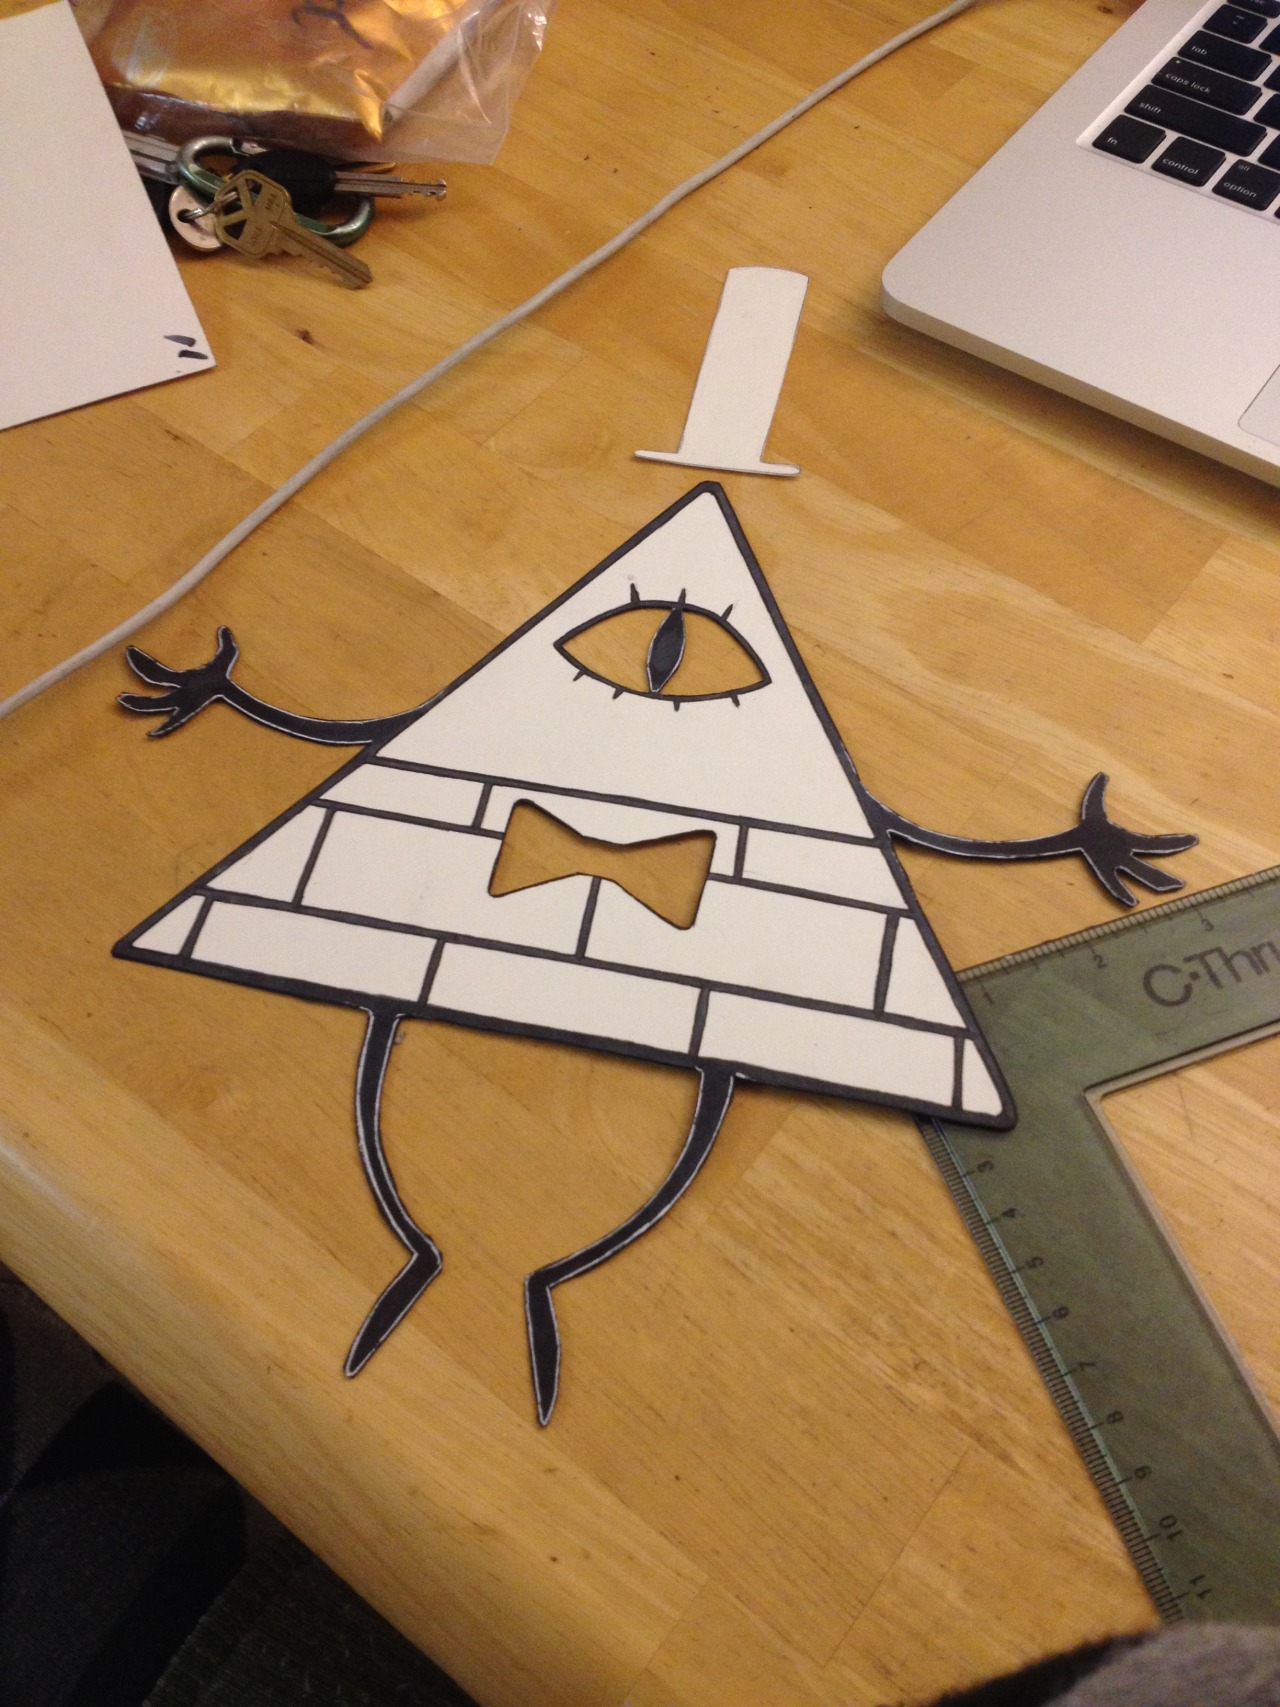 awaicu:  Bill Cipher - Gravity Falls fanart! He’s up in the window of our apartment